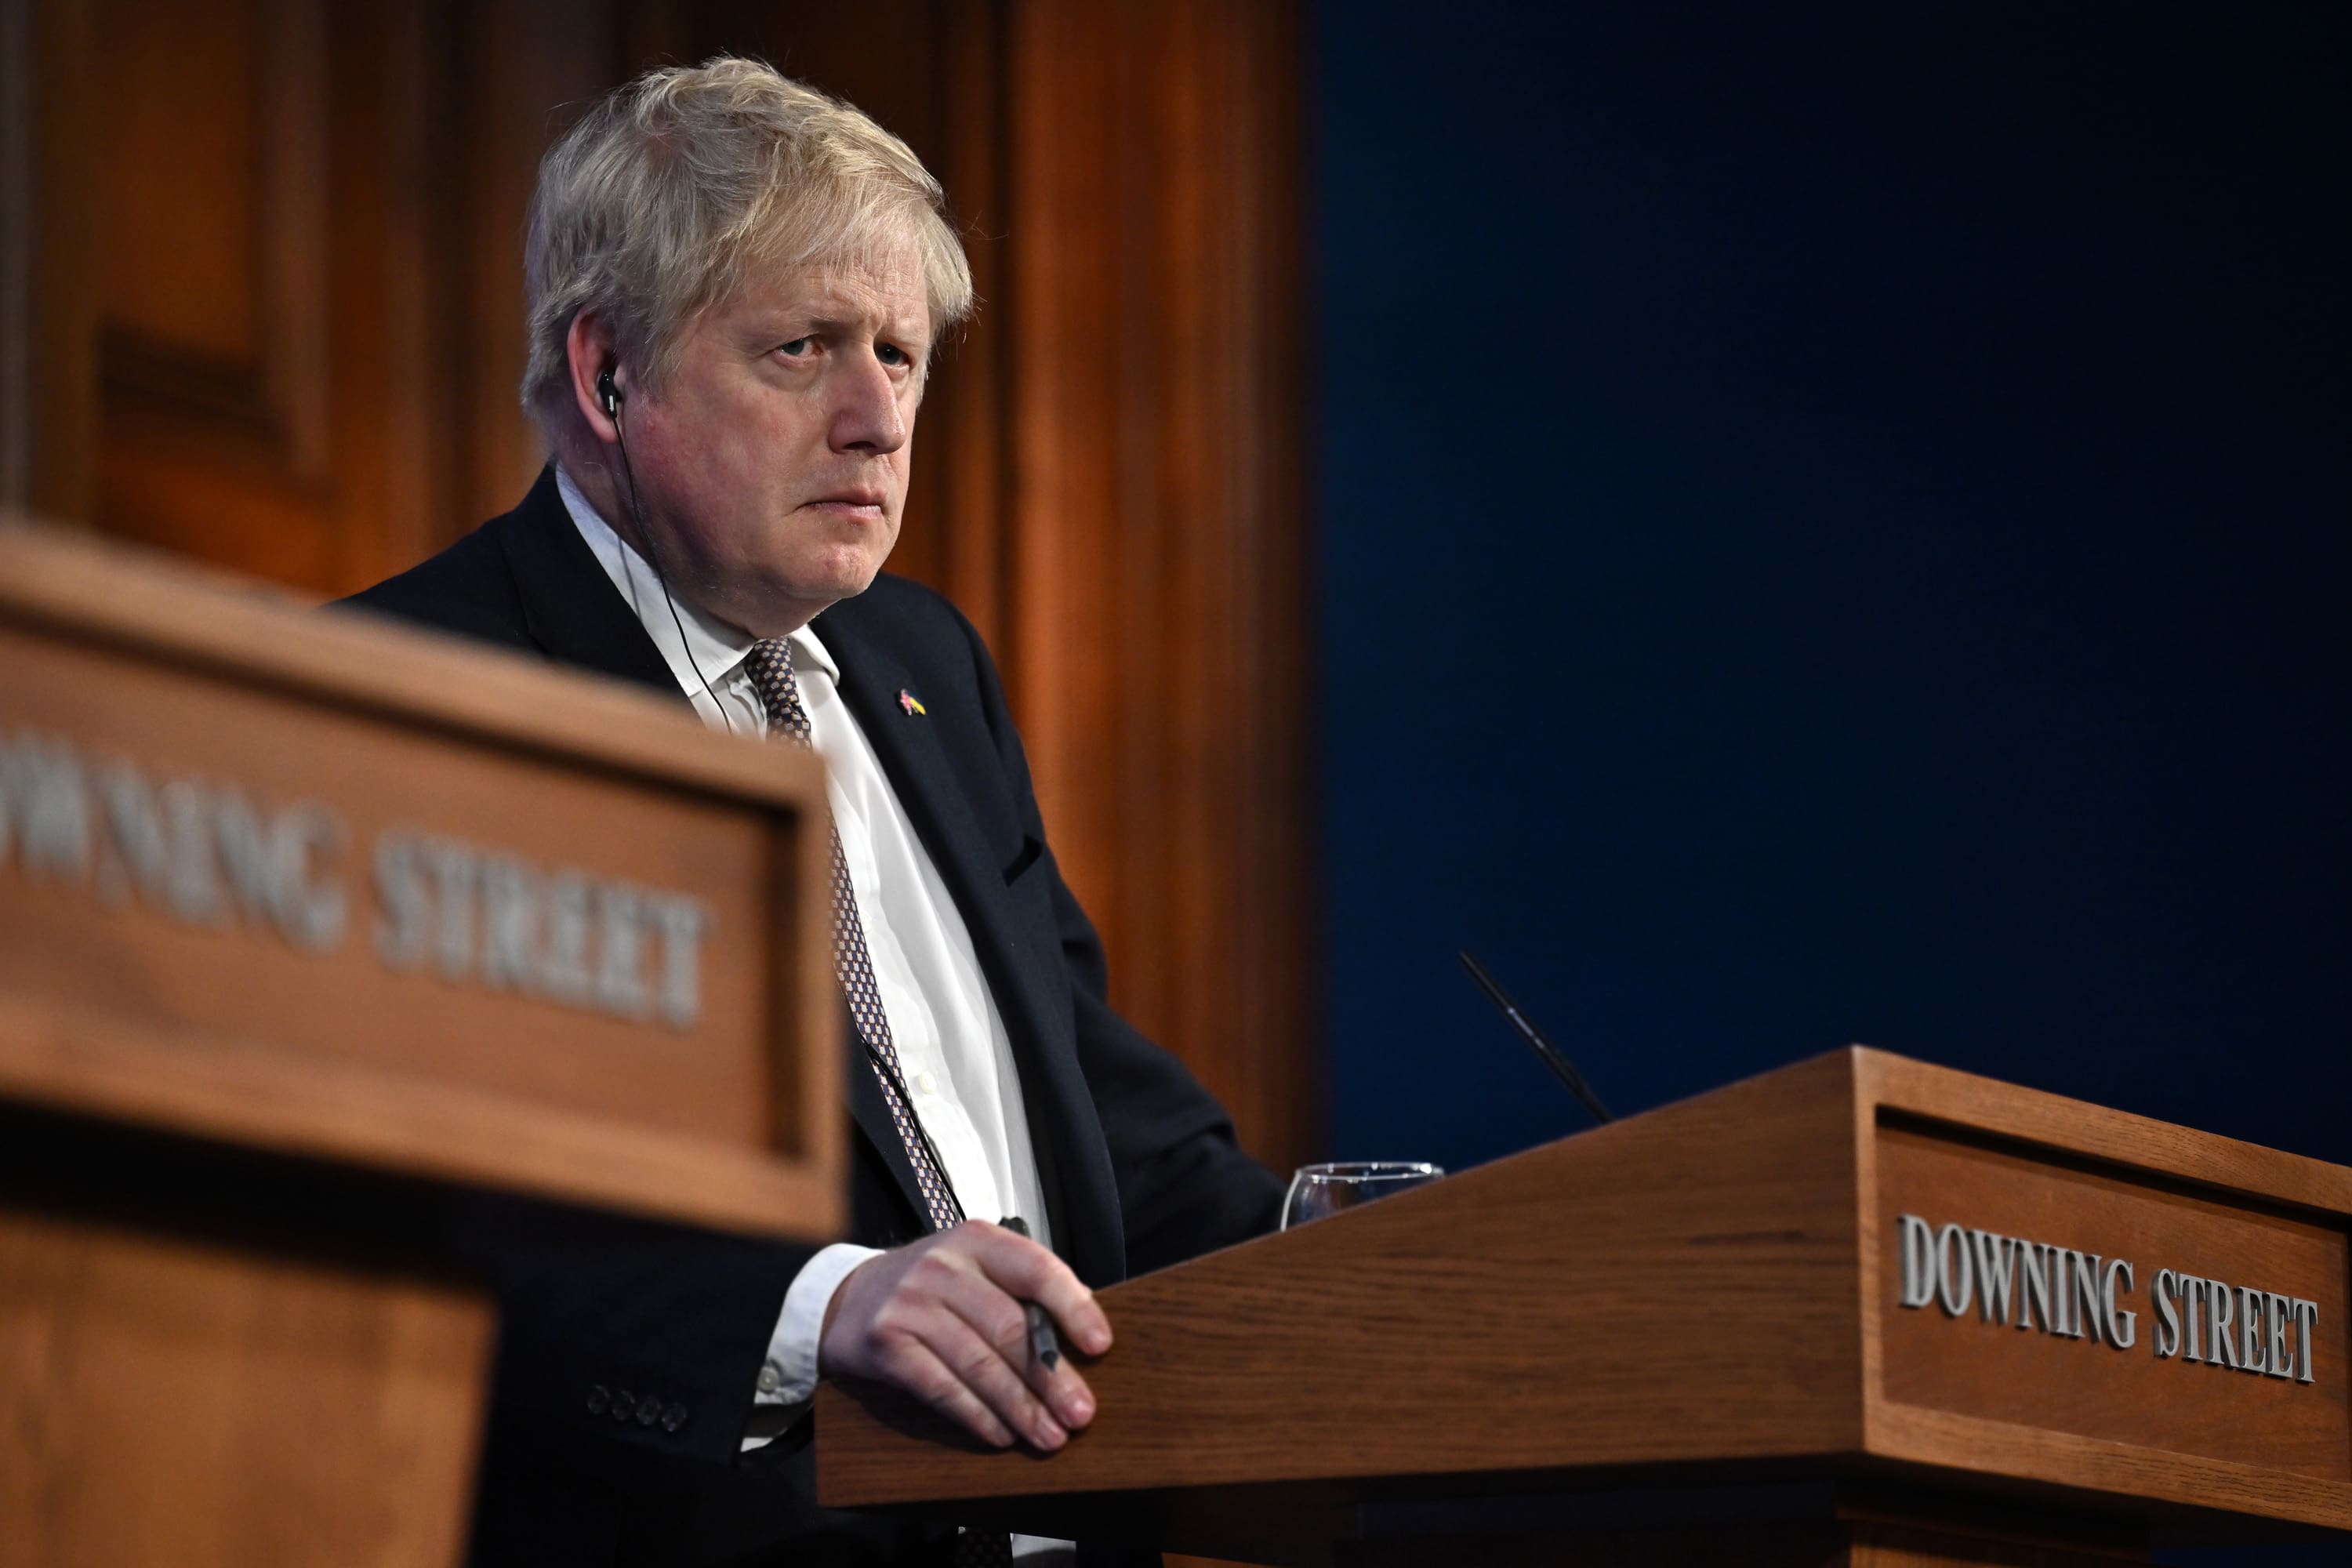 uk-pm-boris-johnson-faces-leadership-vote-after-partygate-scandal-angers-his-own-lawmakers